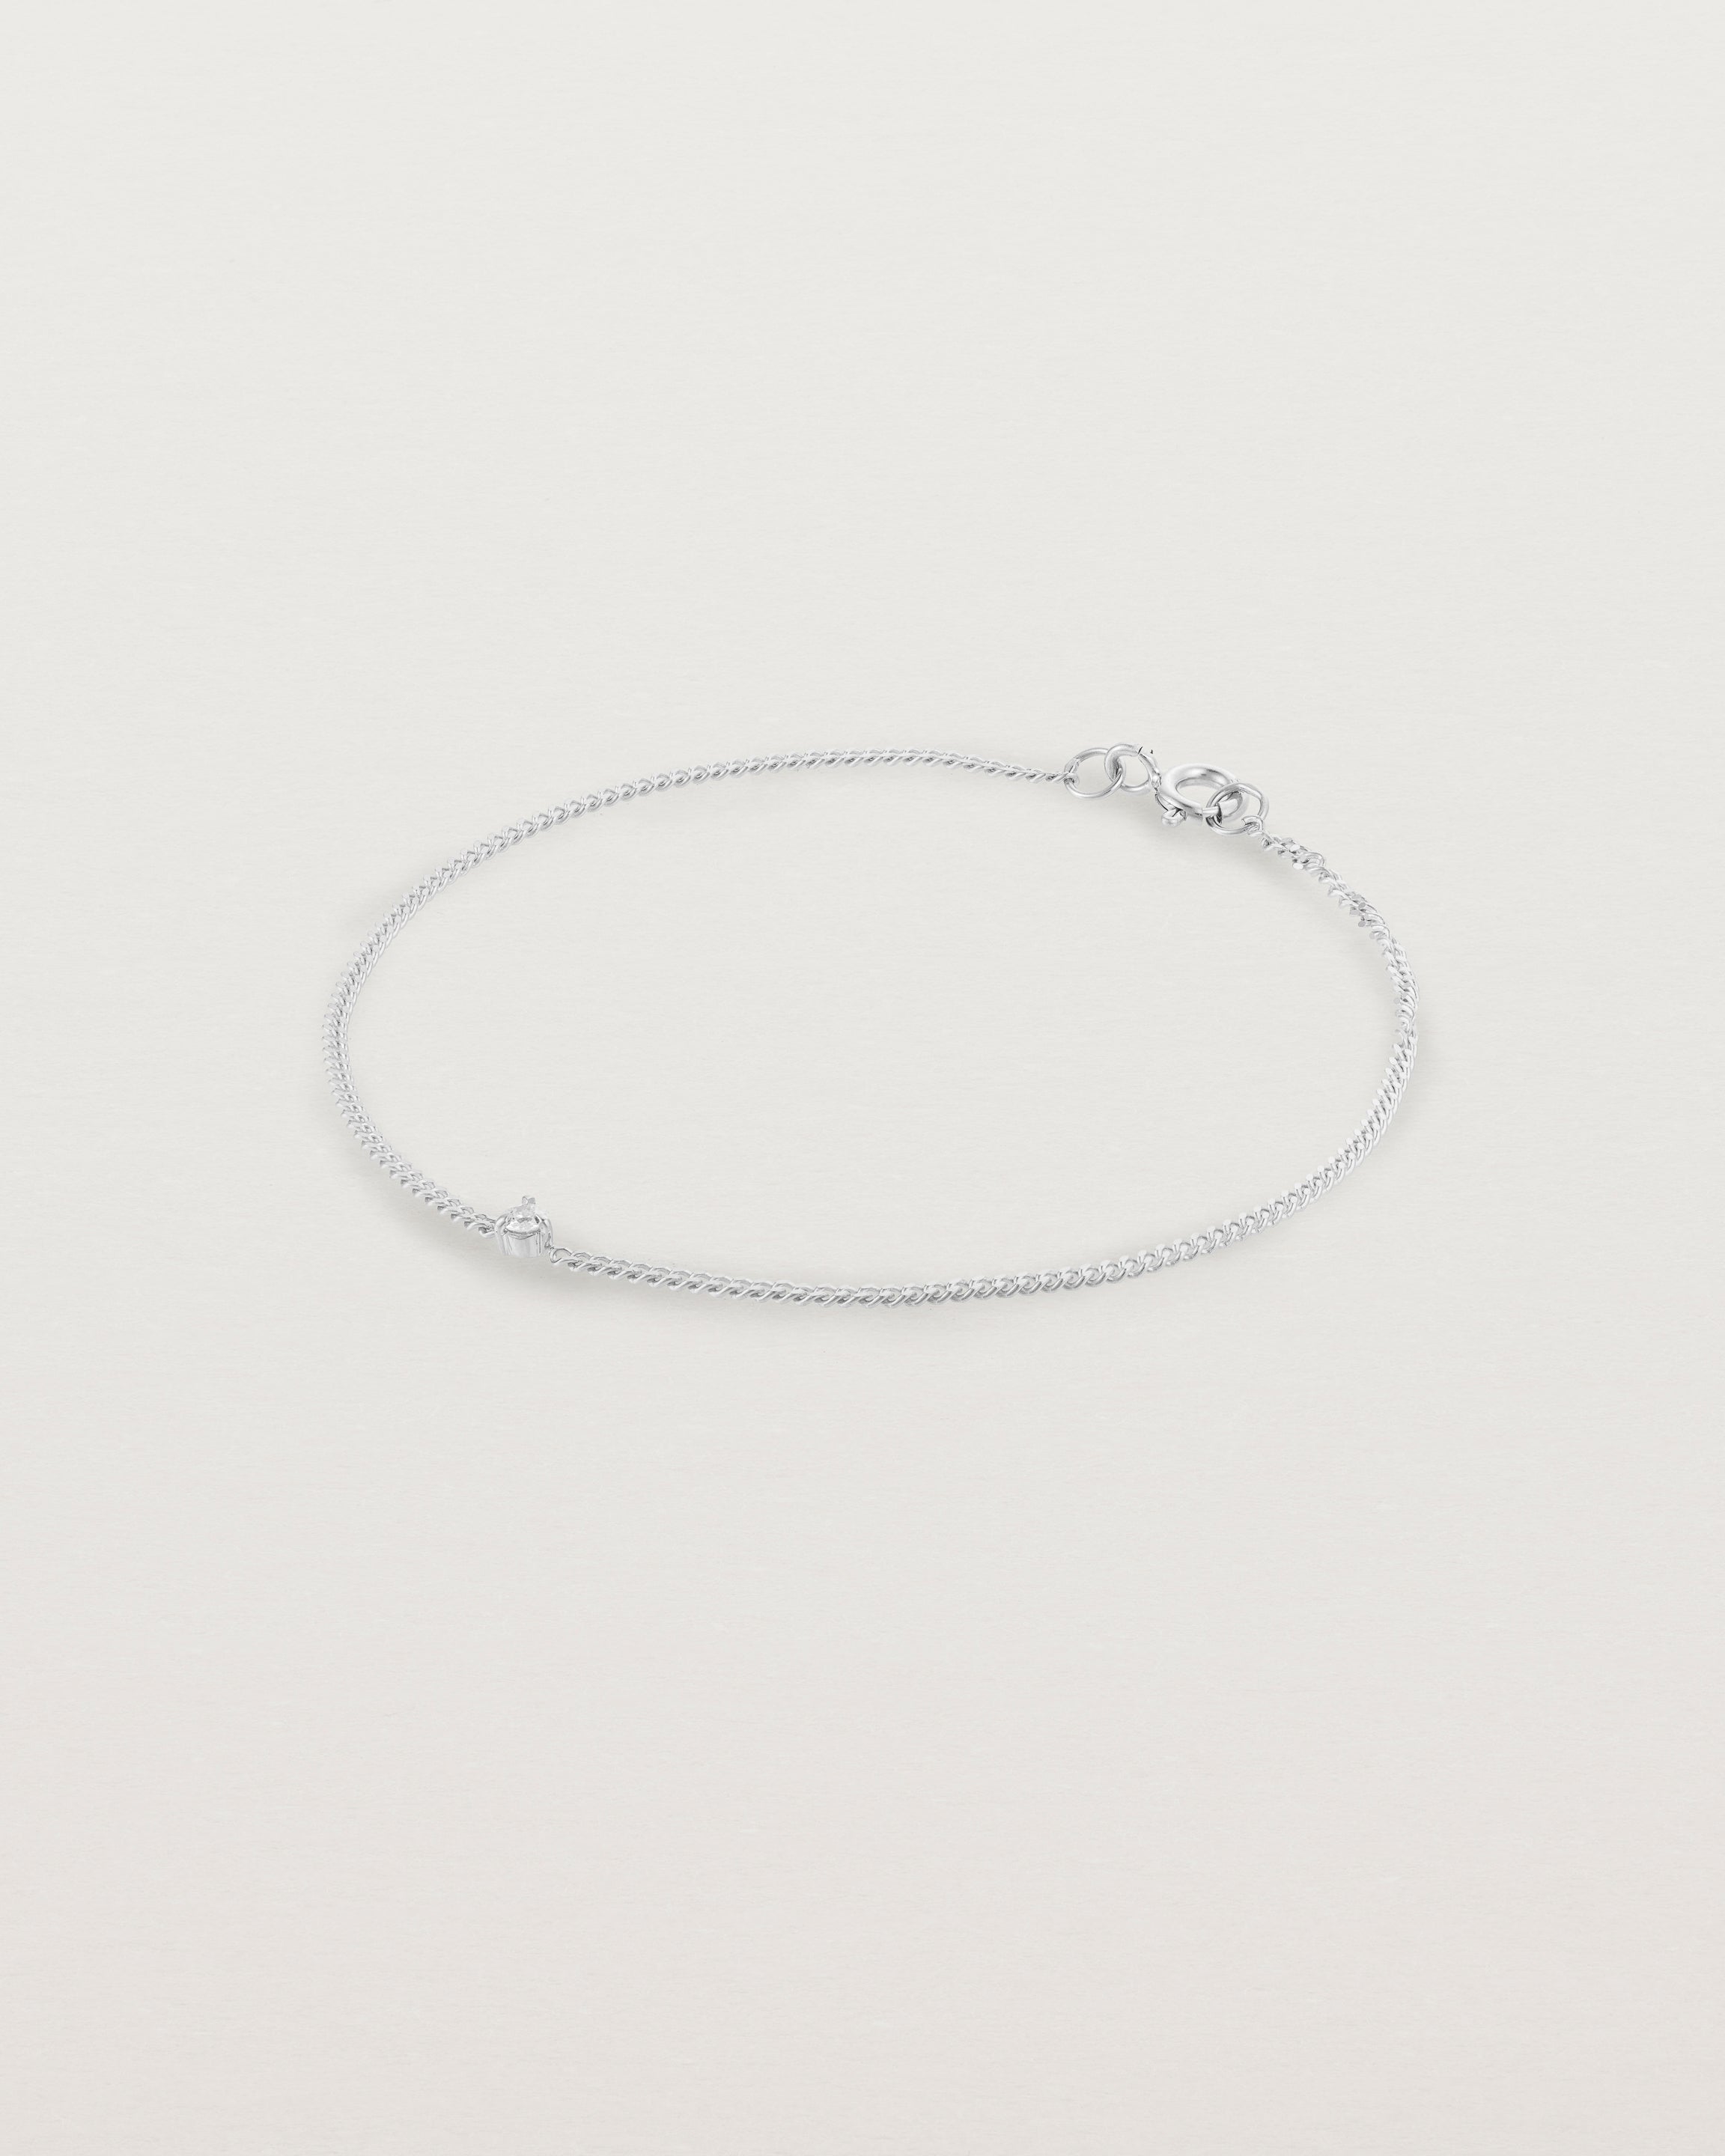 A white gold chain bracelet featuring a single white old cut diamond